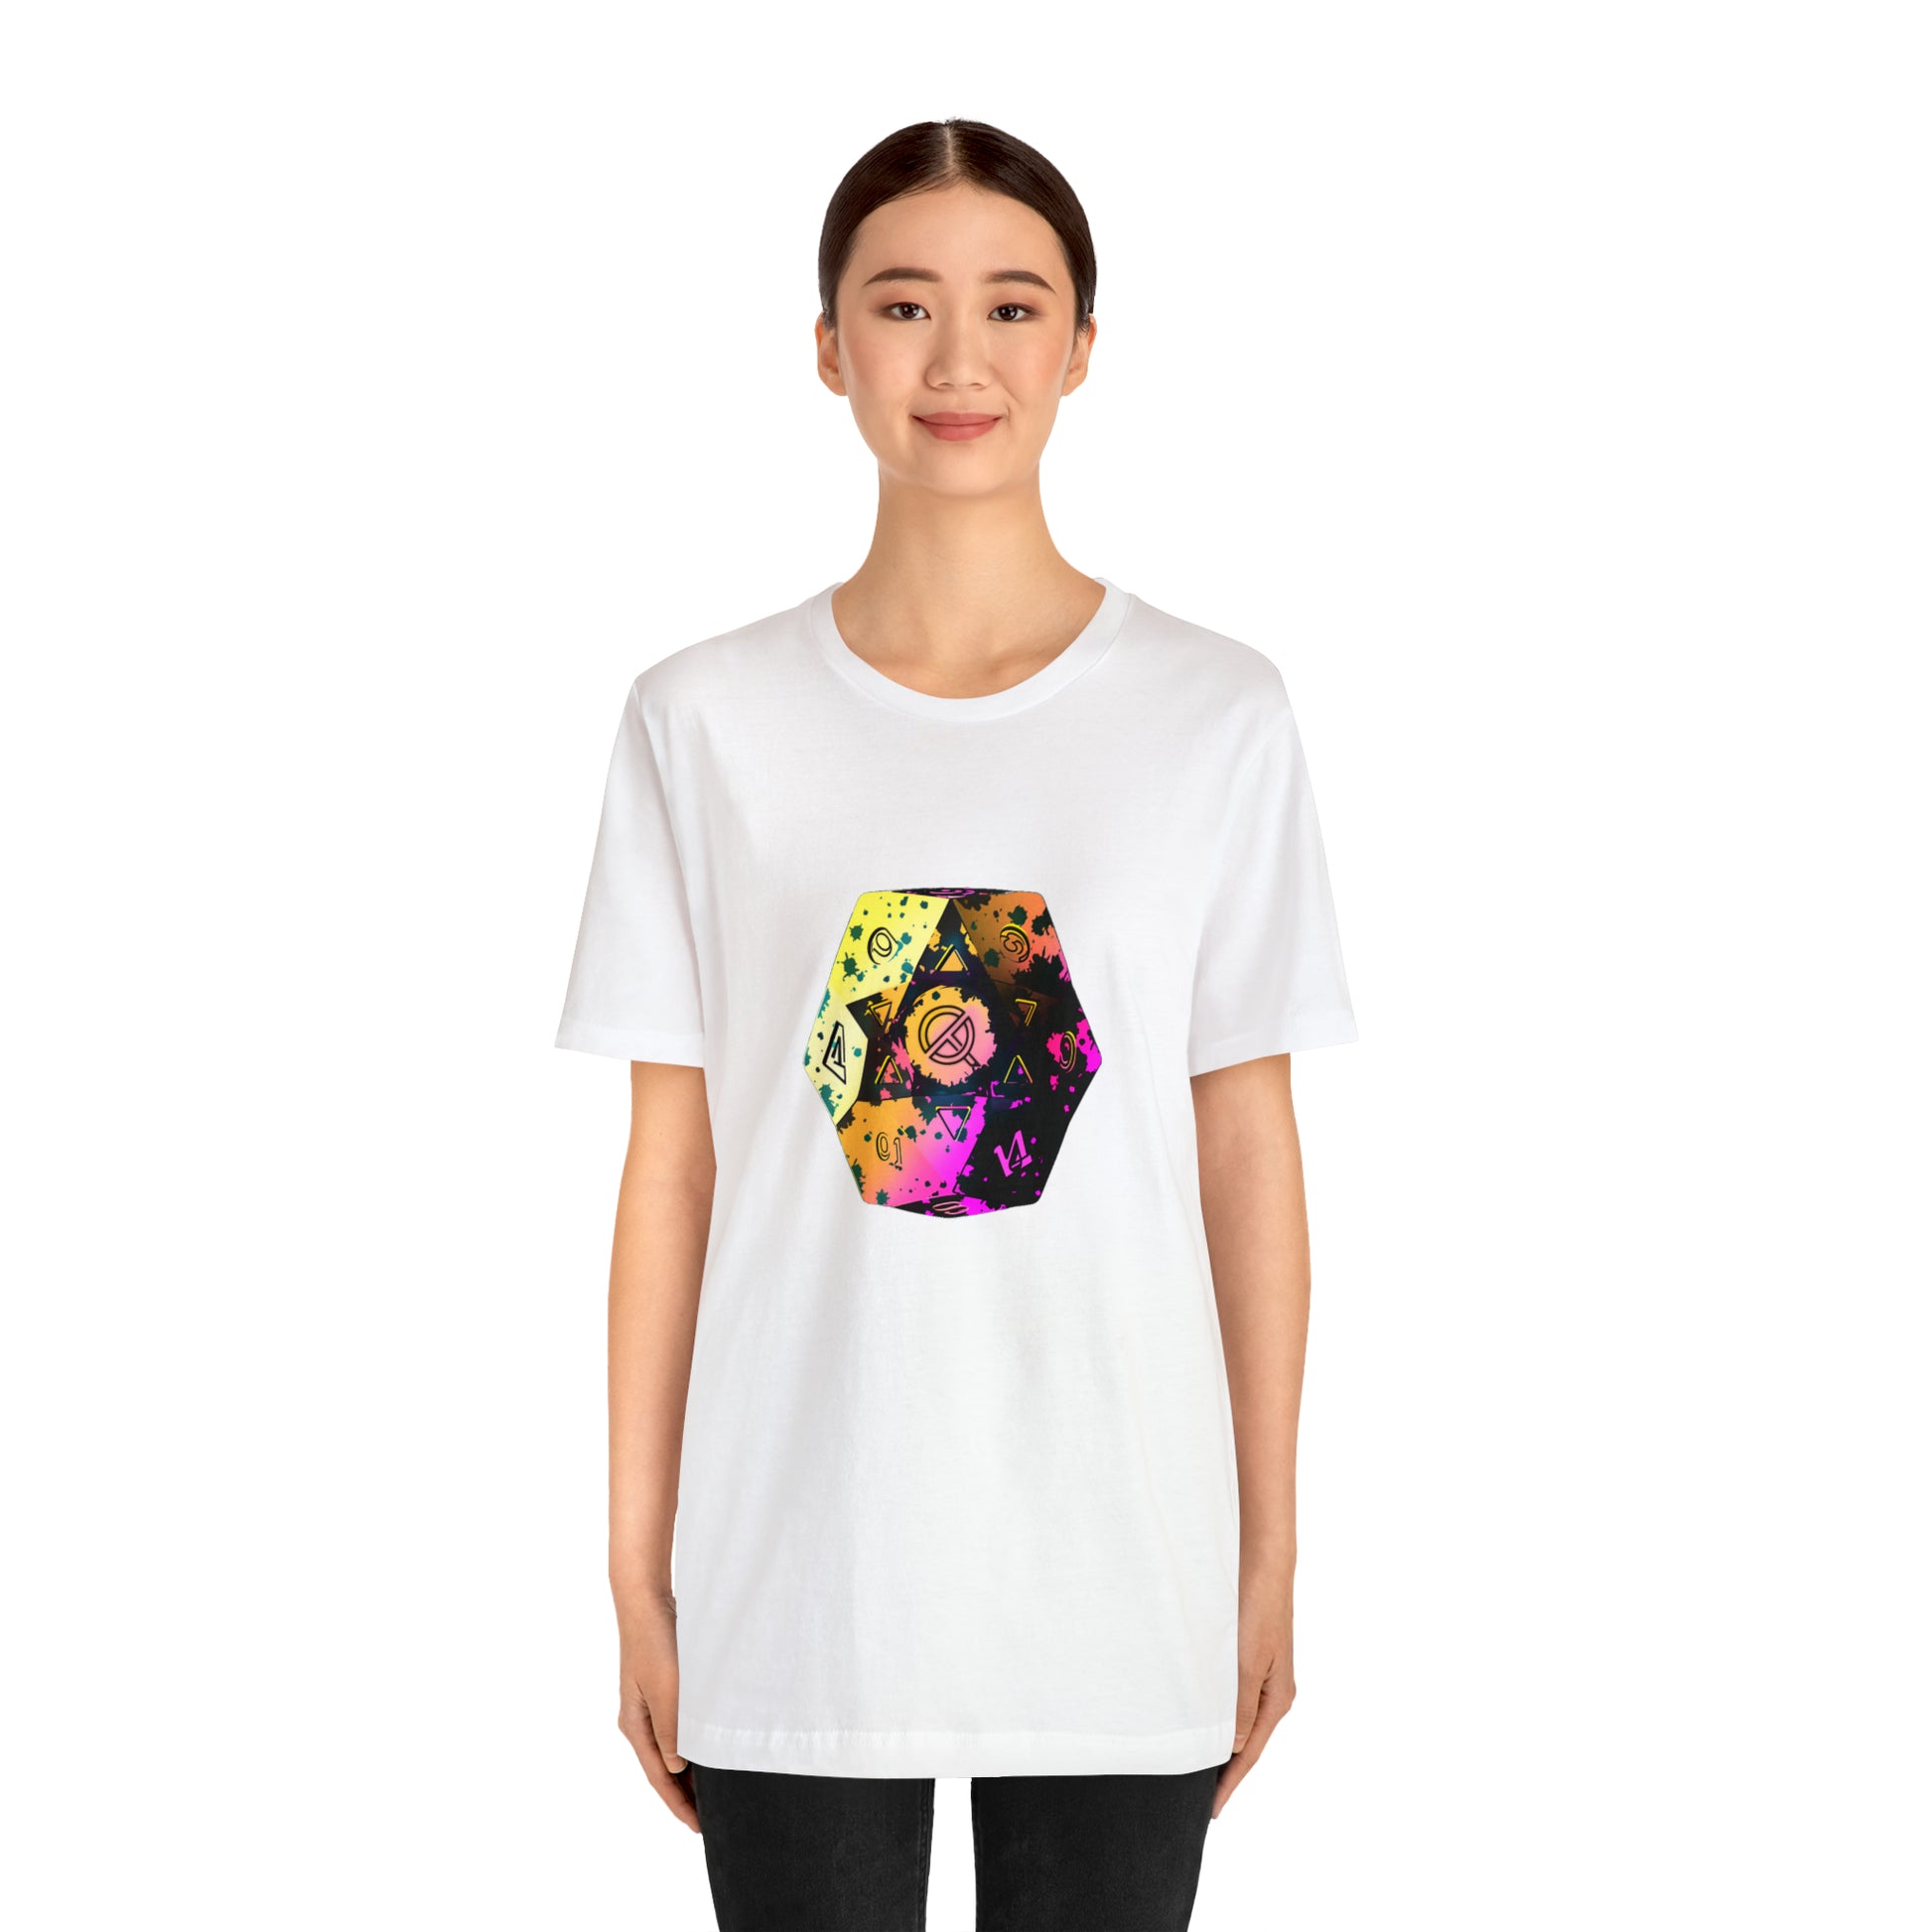 white-quest-thread-tee-shirt-with-large-neon-d20-dice-on-center